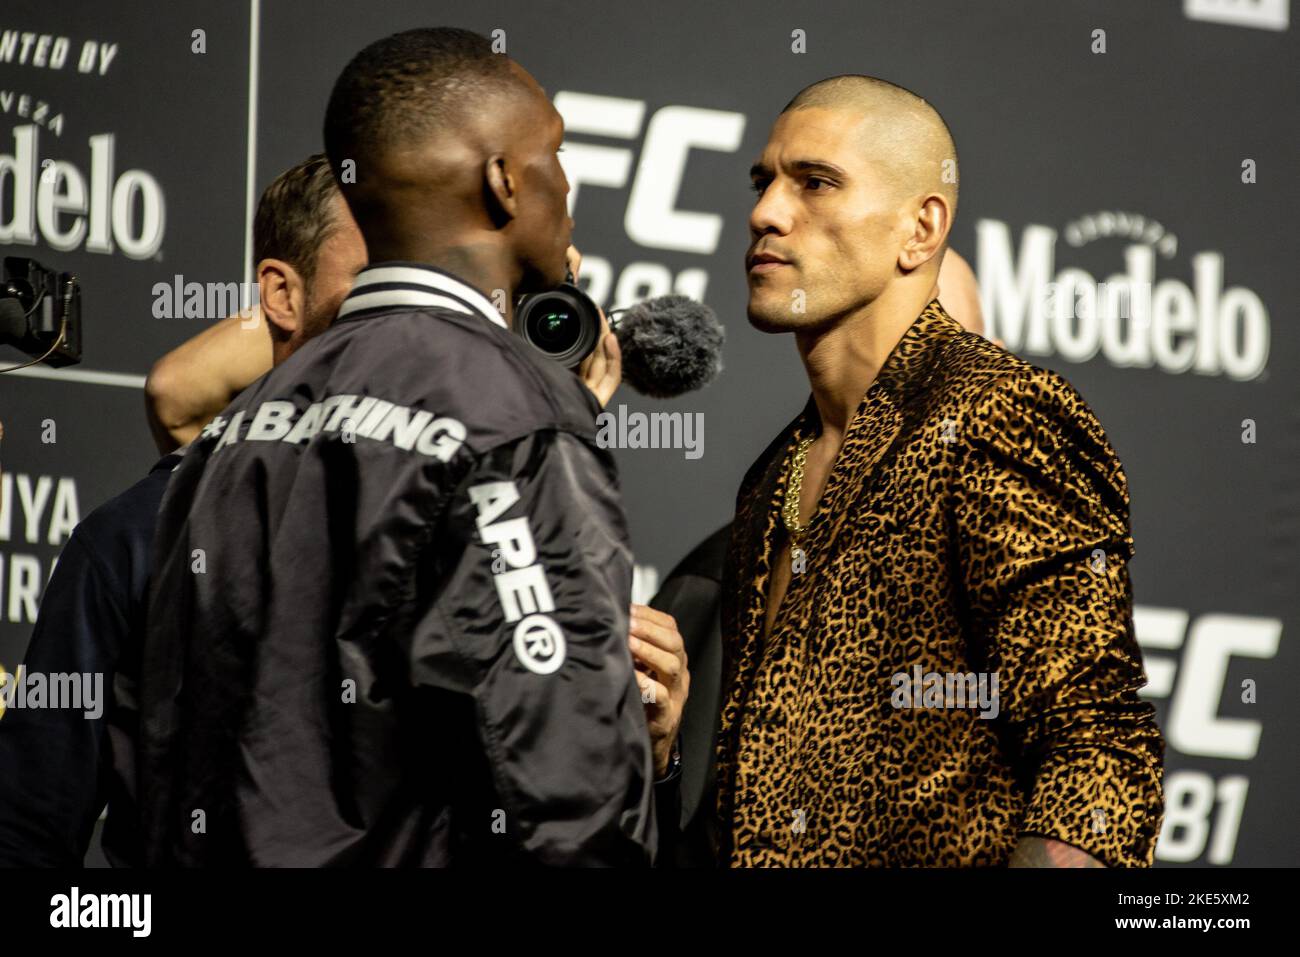 NEW YORK, NY - NOVEMBER 9: Israel Adesanya (Champion) and Alex Pereira face off Ahead of their UFC Middleweight Title bout Saturday night at Madison Square Garden (Photo by Matt Davies/PxImages) Stock Photo